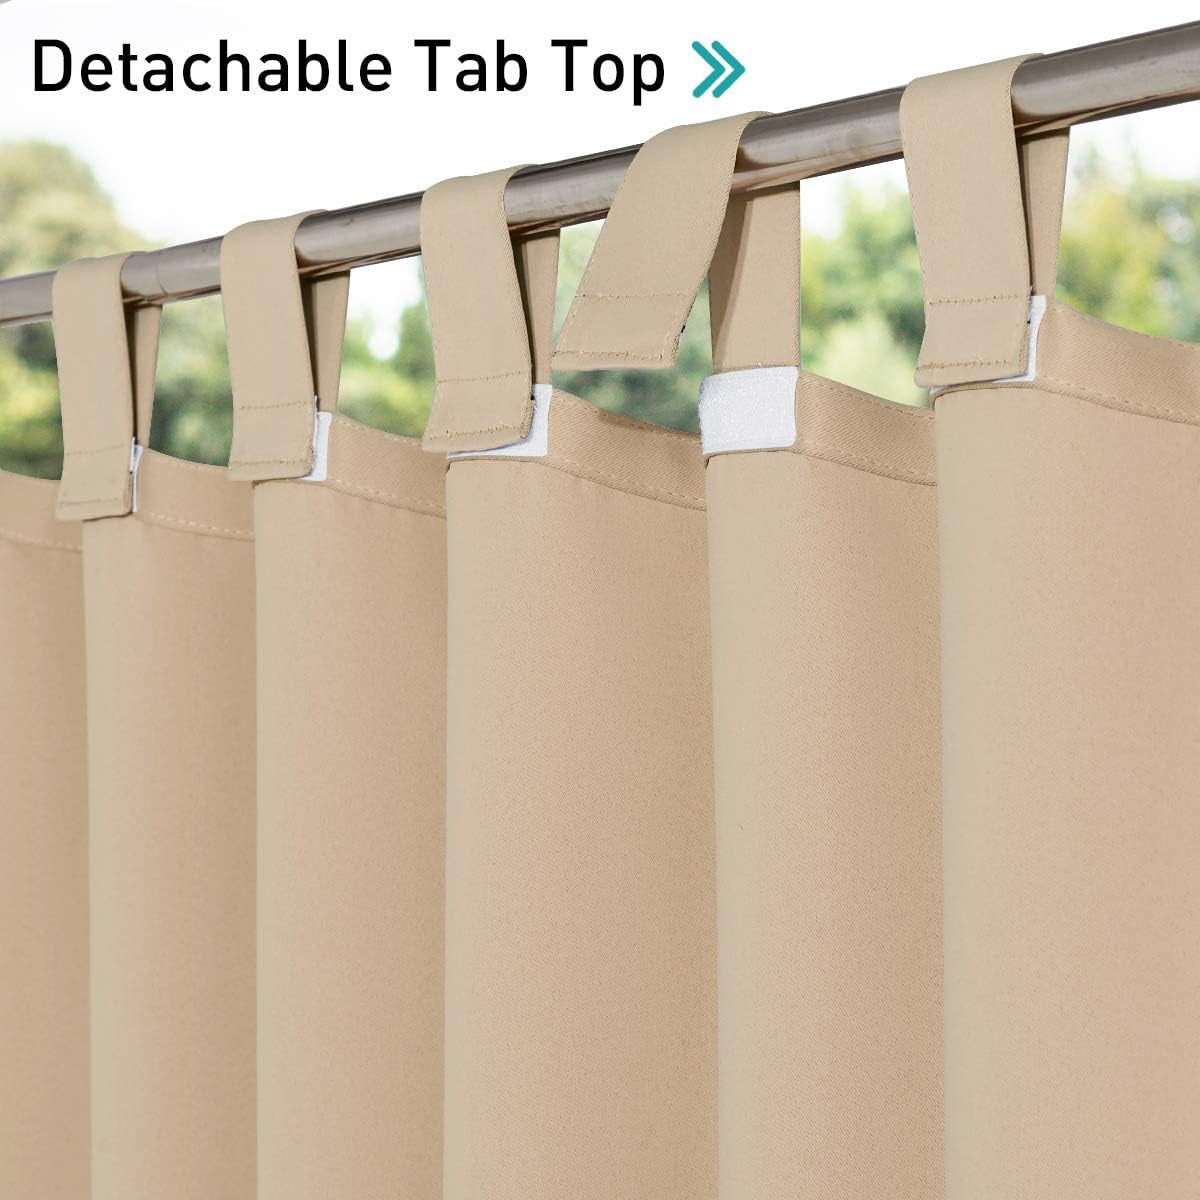 NICETOWN 2 Panels Outdoor Patio Curtainss Waterproof Room Darkening Drapes, Detachable Sticky Tab Top Thermal Insulated Privacy Outdoor Dividers for Porch/Doorway, Biscotti Beige, W52 X L84  NICETOWN   